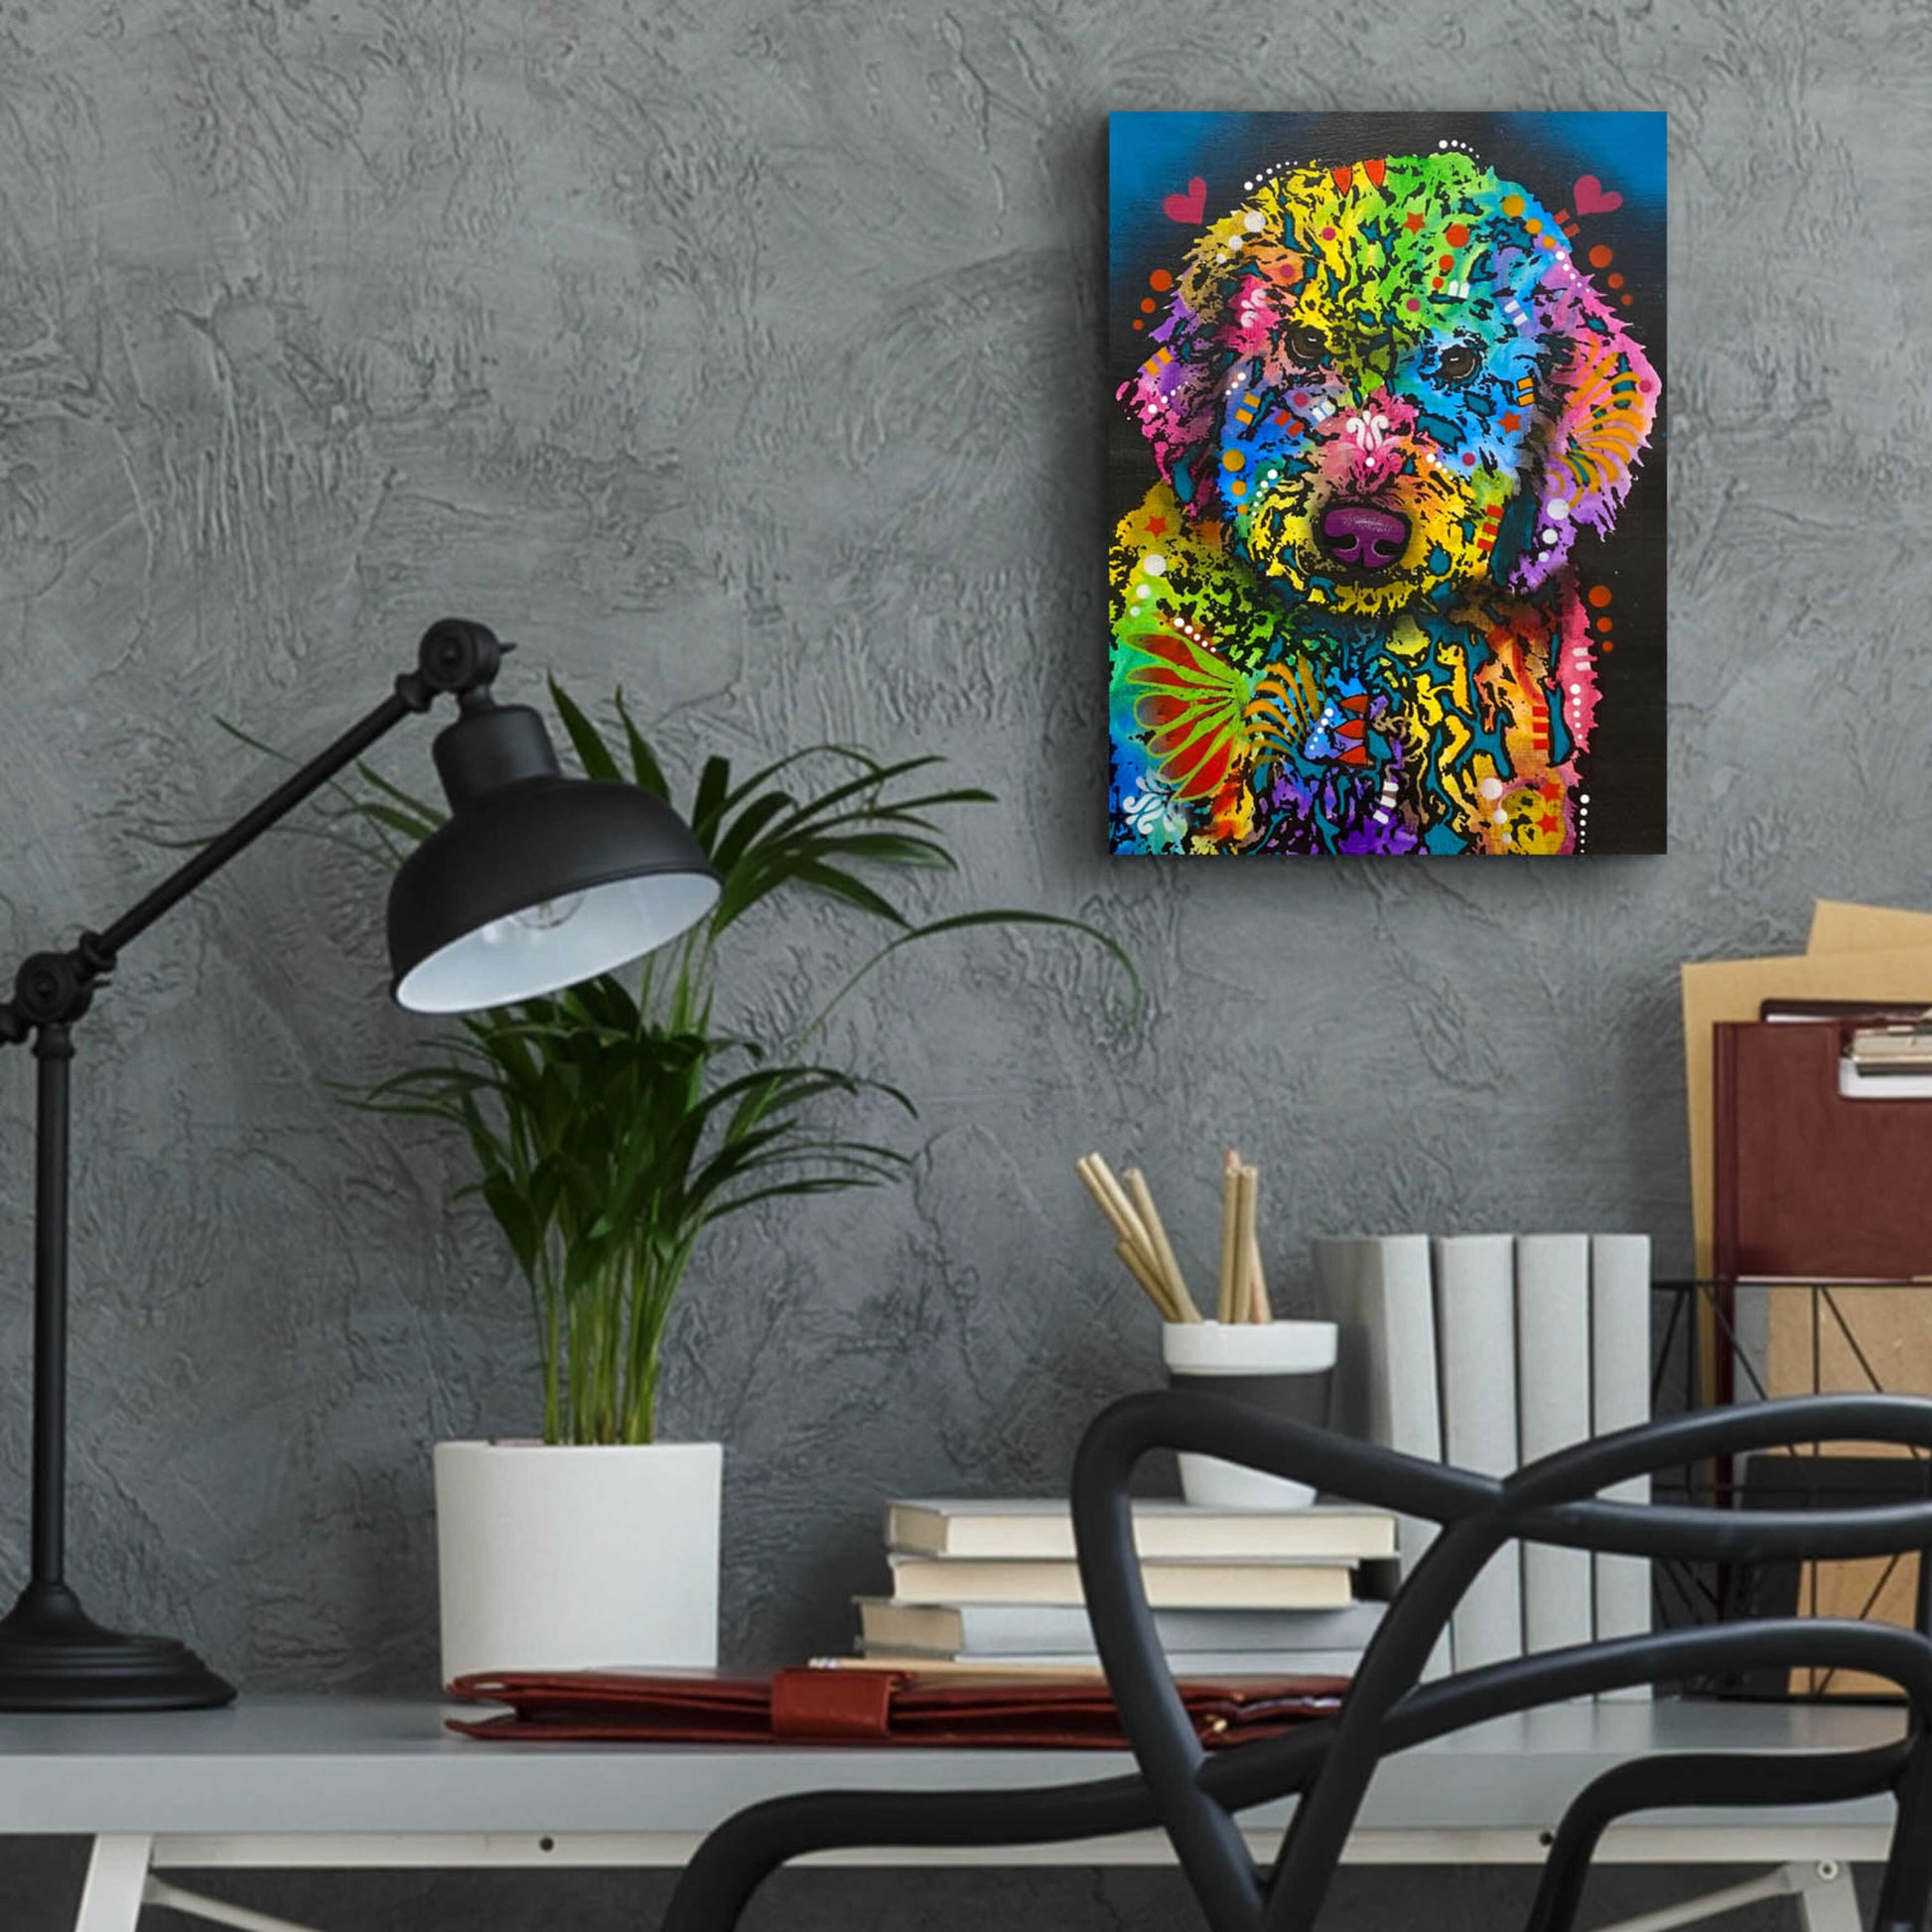 Epic Art 'I Am Here To Listen' by Dean Russo, Acrylic Glass Wall Art,12x16